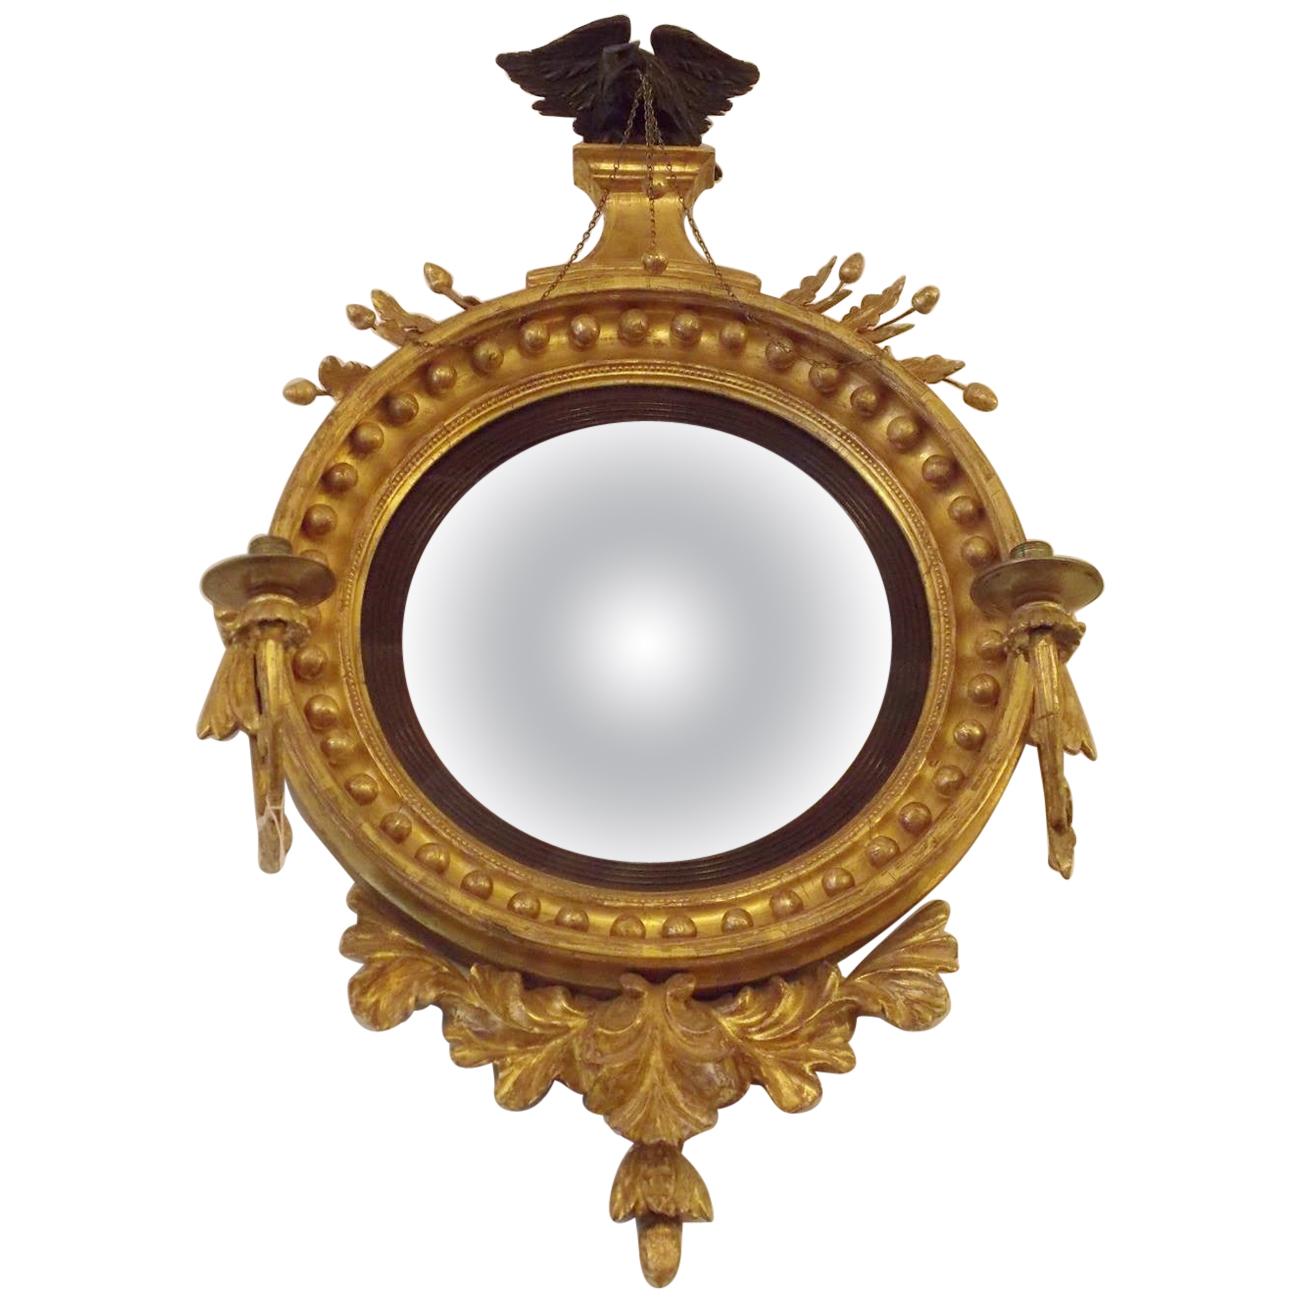 What are some examples of convex mirrors?